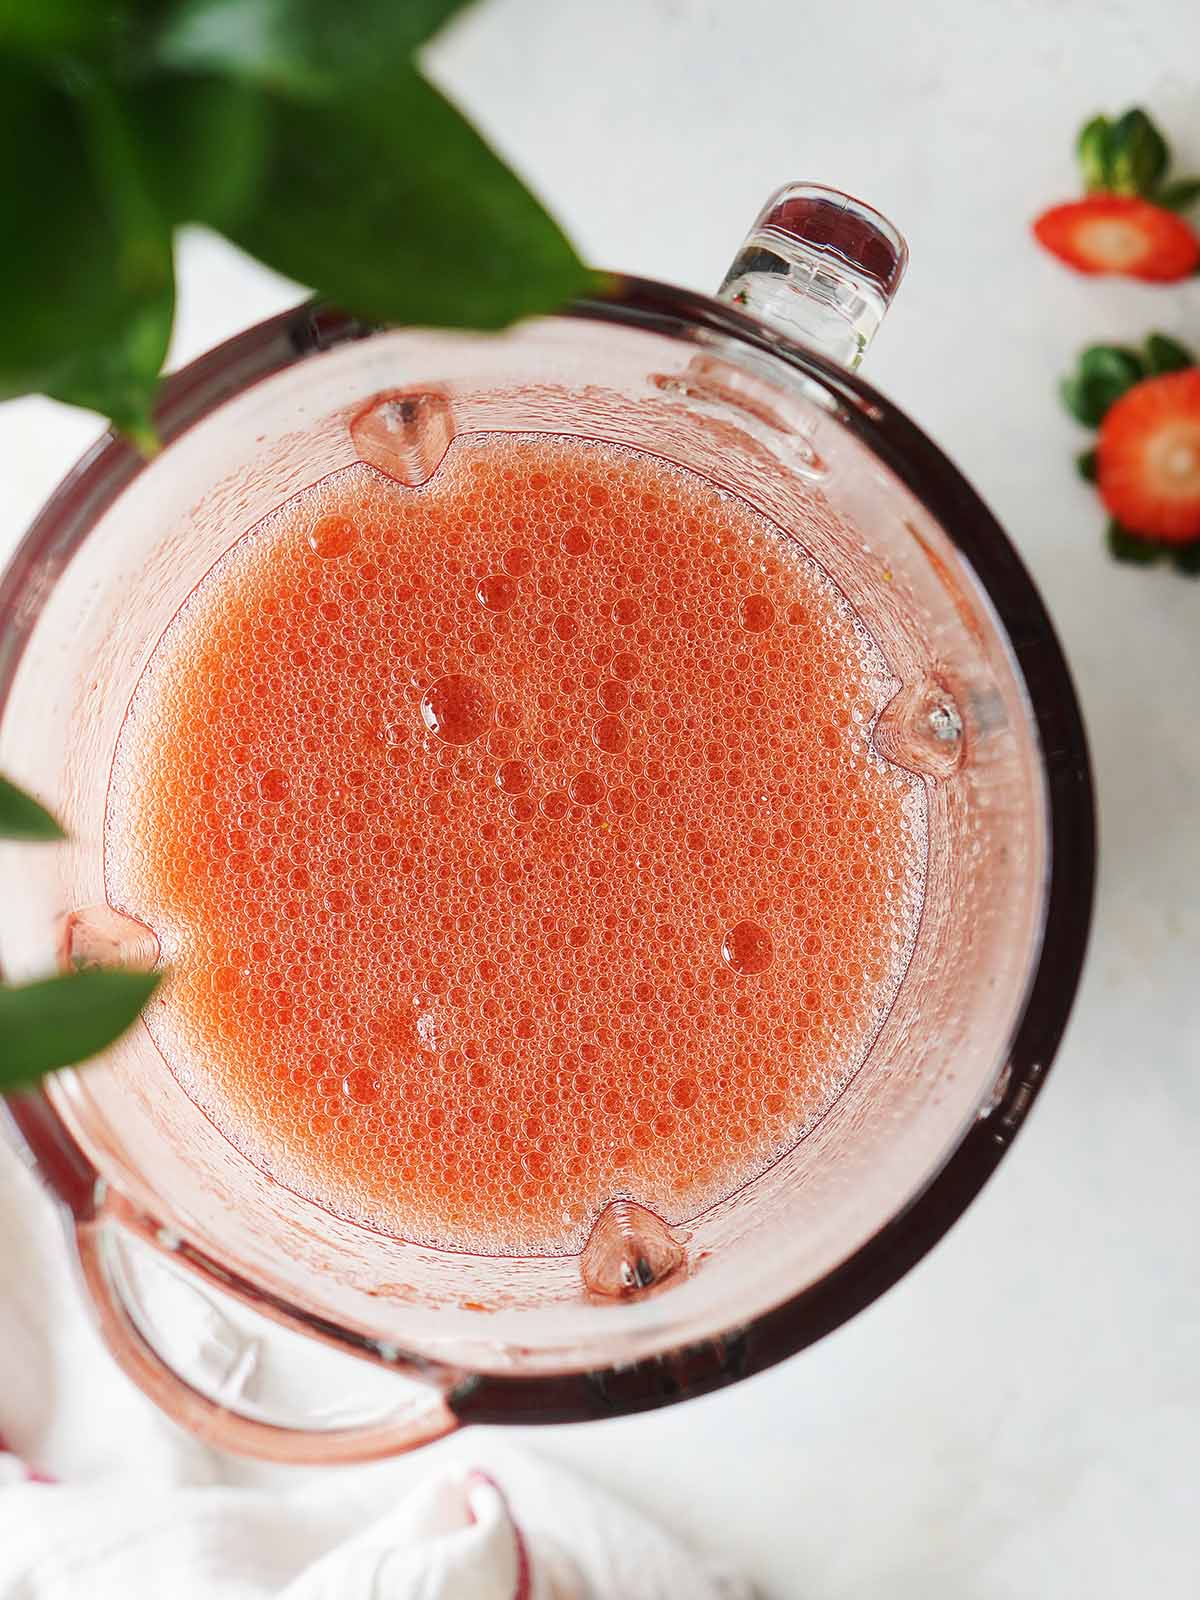 Blended strawberry juice in a blender's cup.